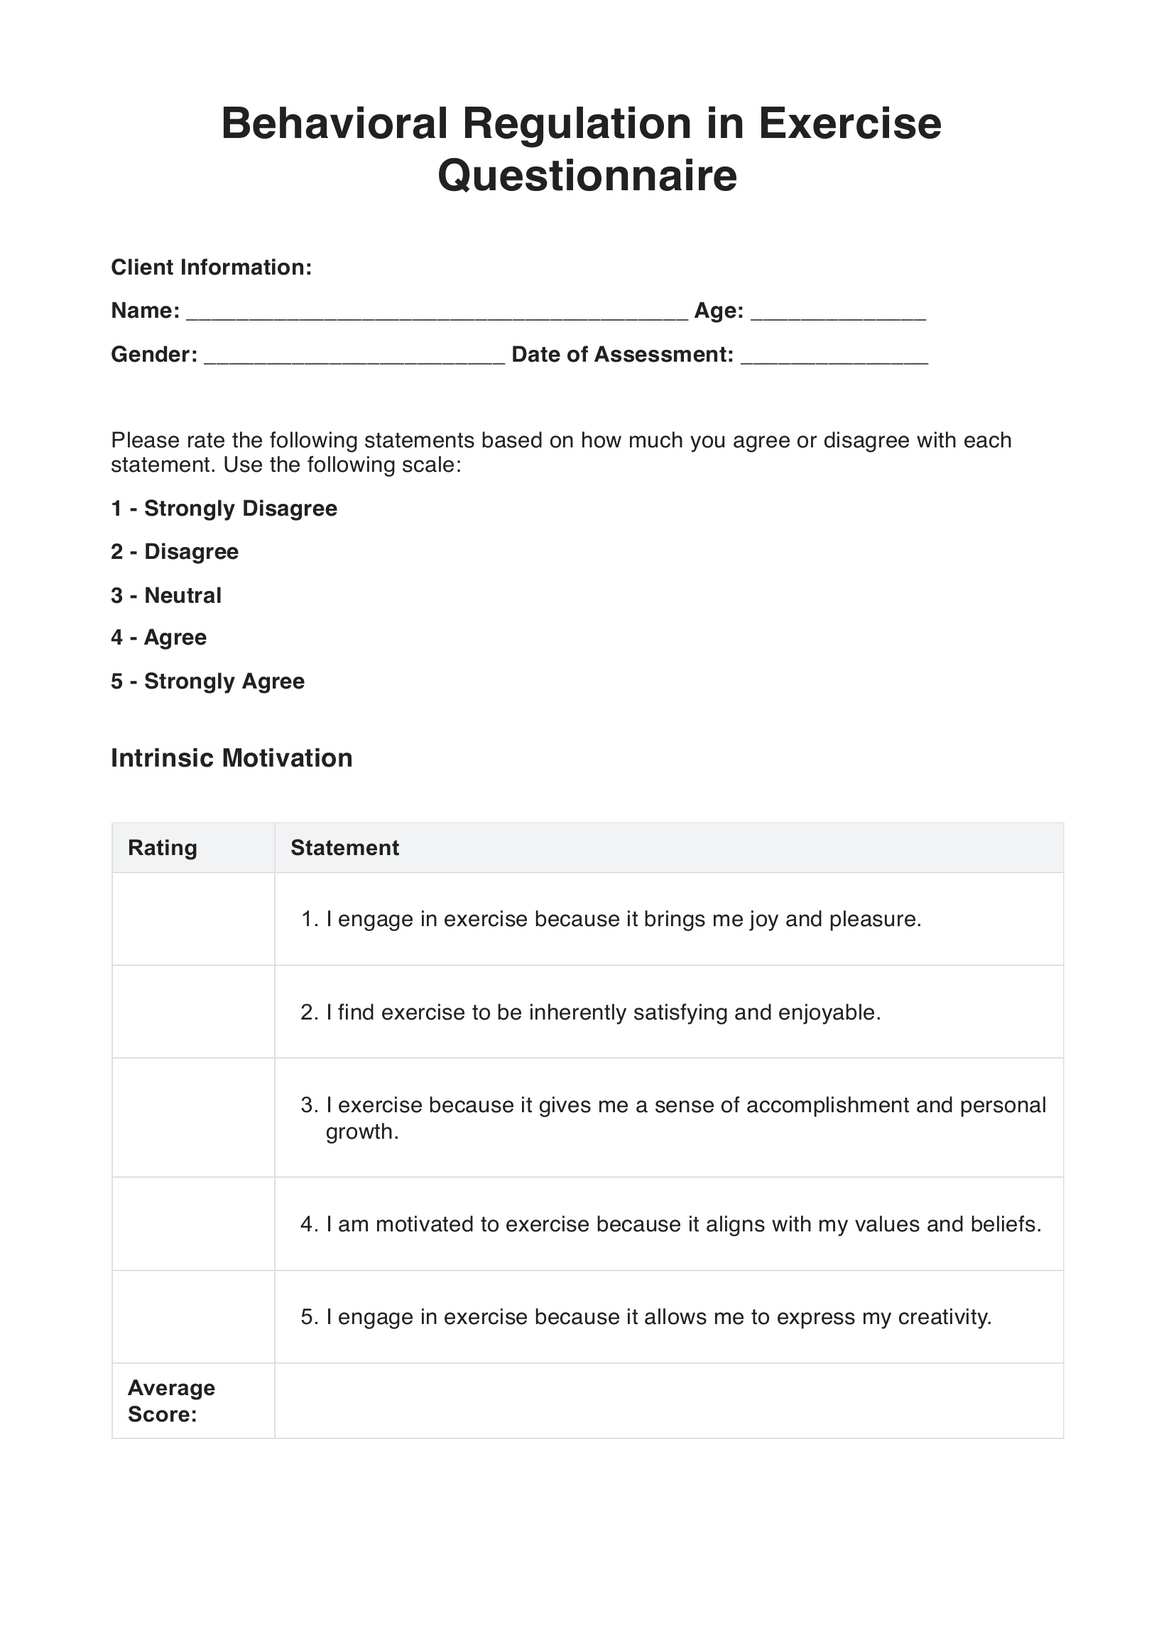 Behavioral Regulation In Exercise Questionnaire PDF Example